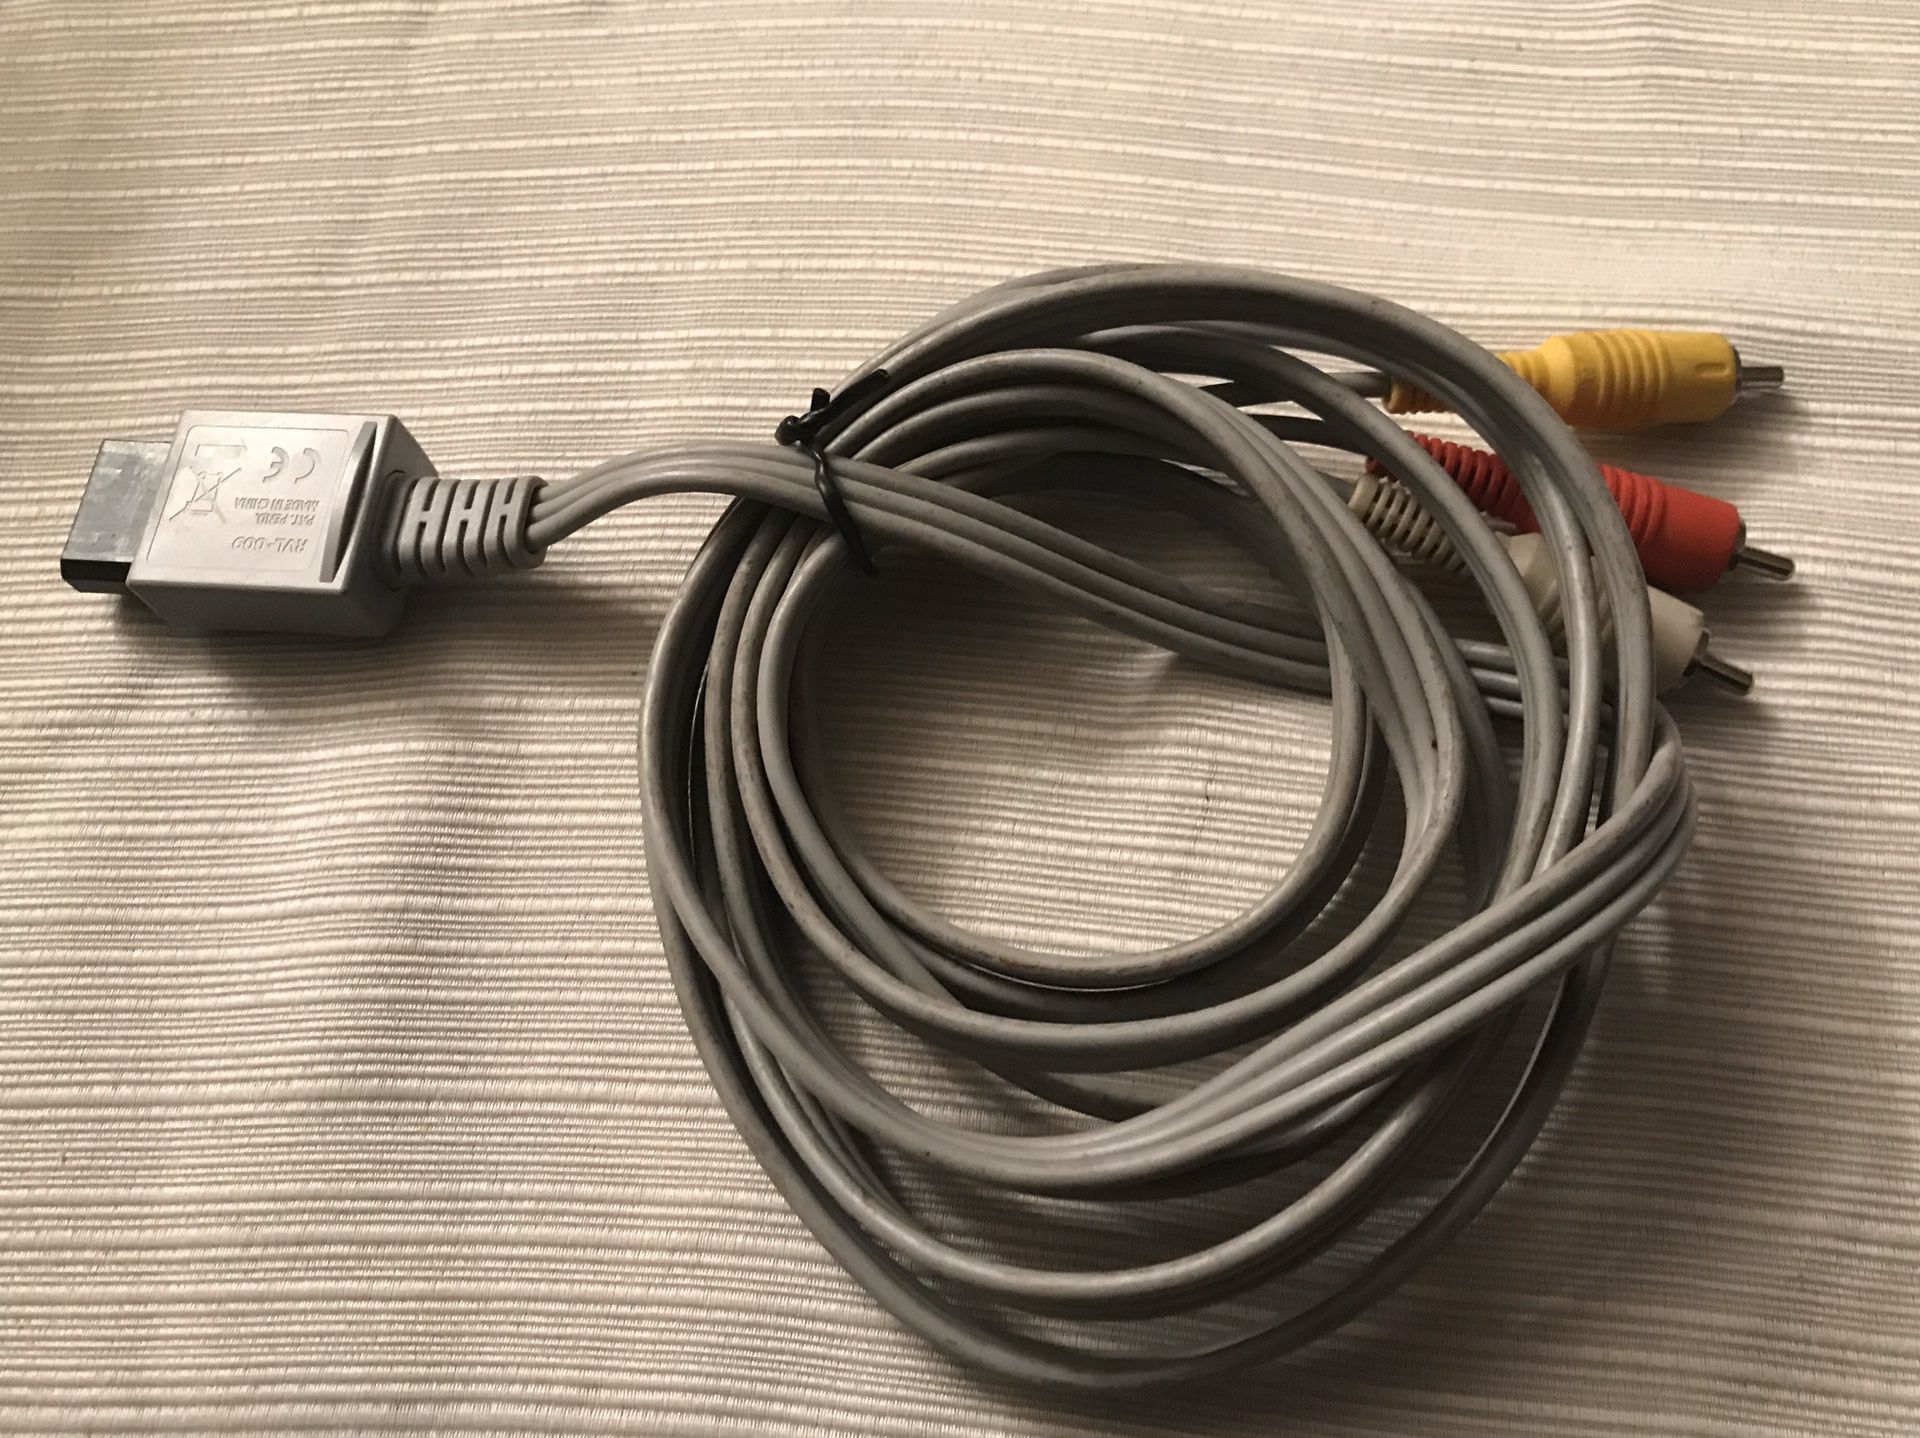 Wii Audio Video AV cable cord